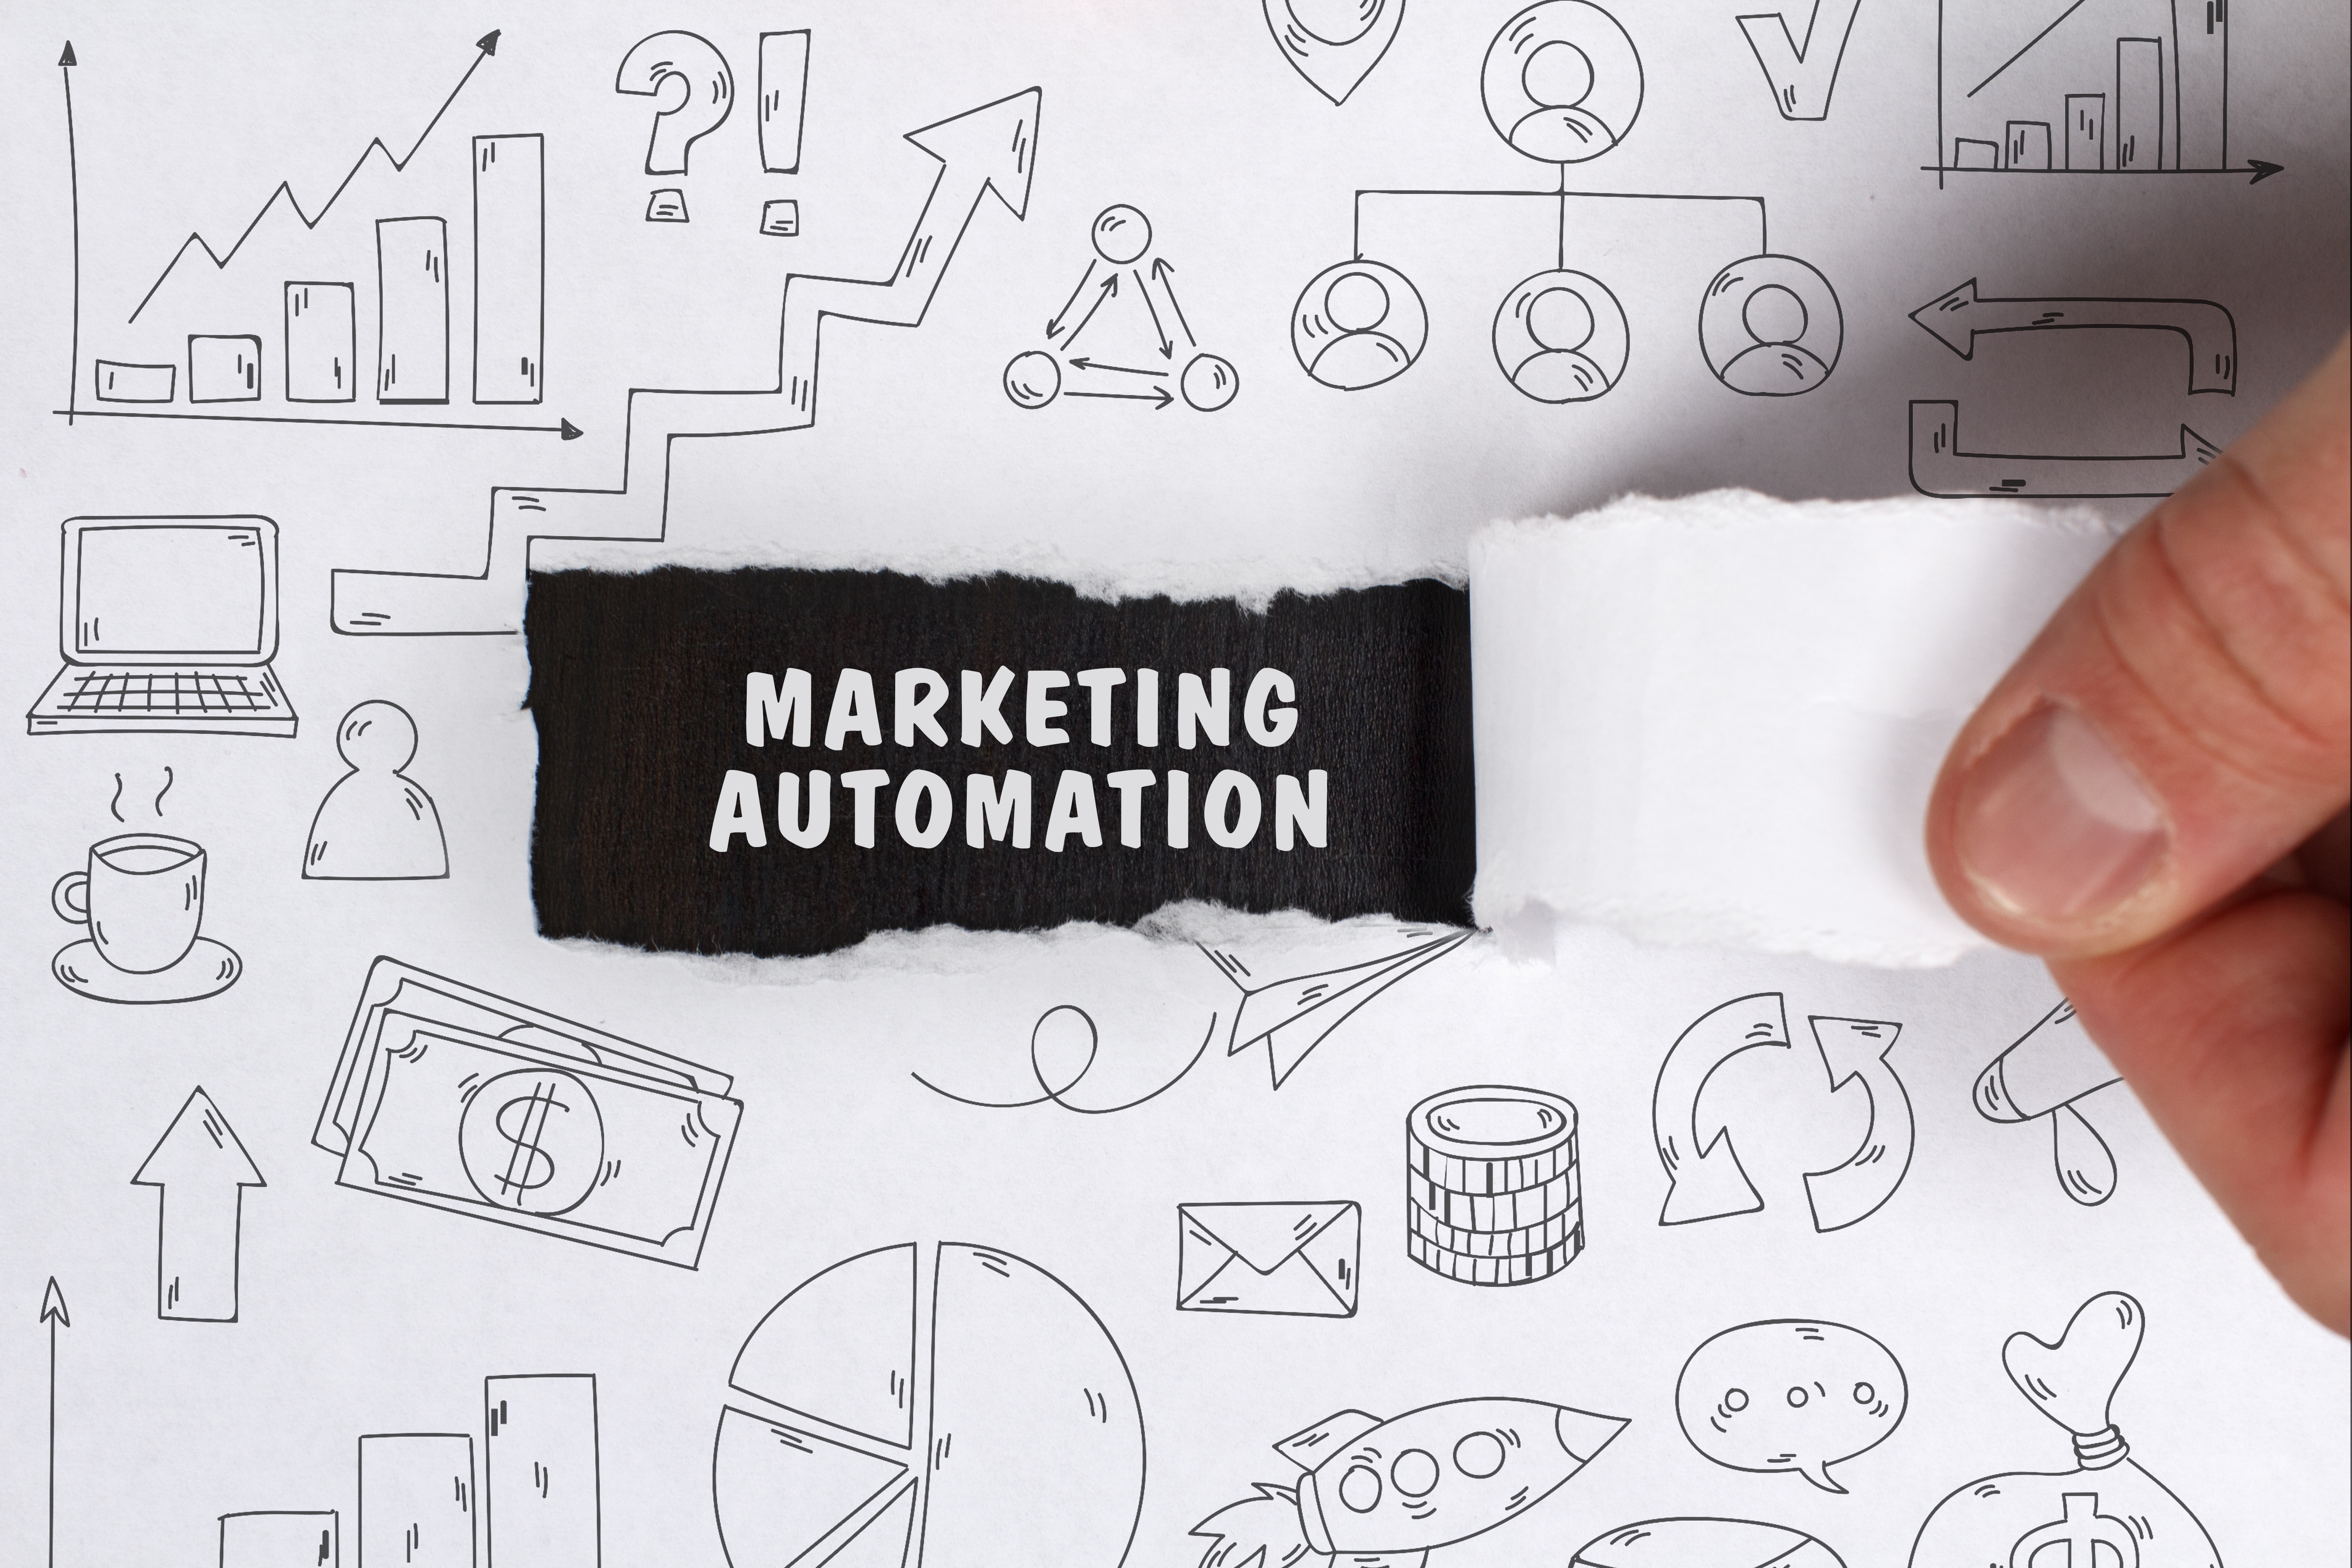 Marketing Automation Software Powers Business Growth